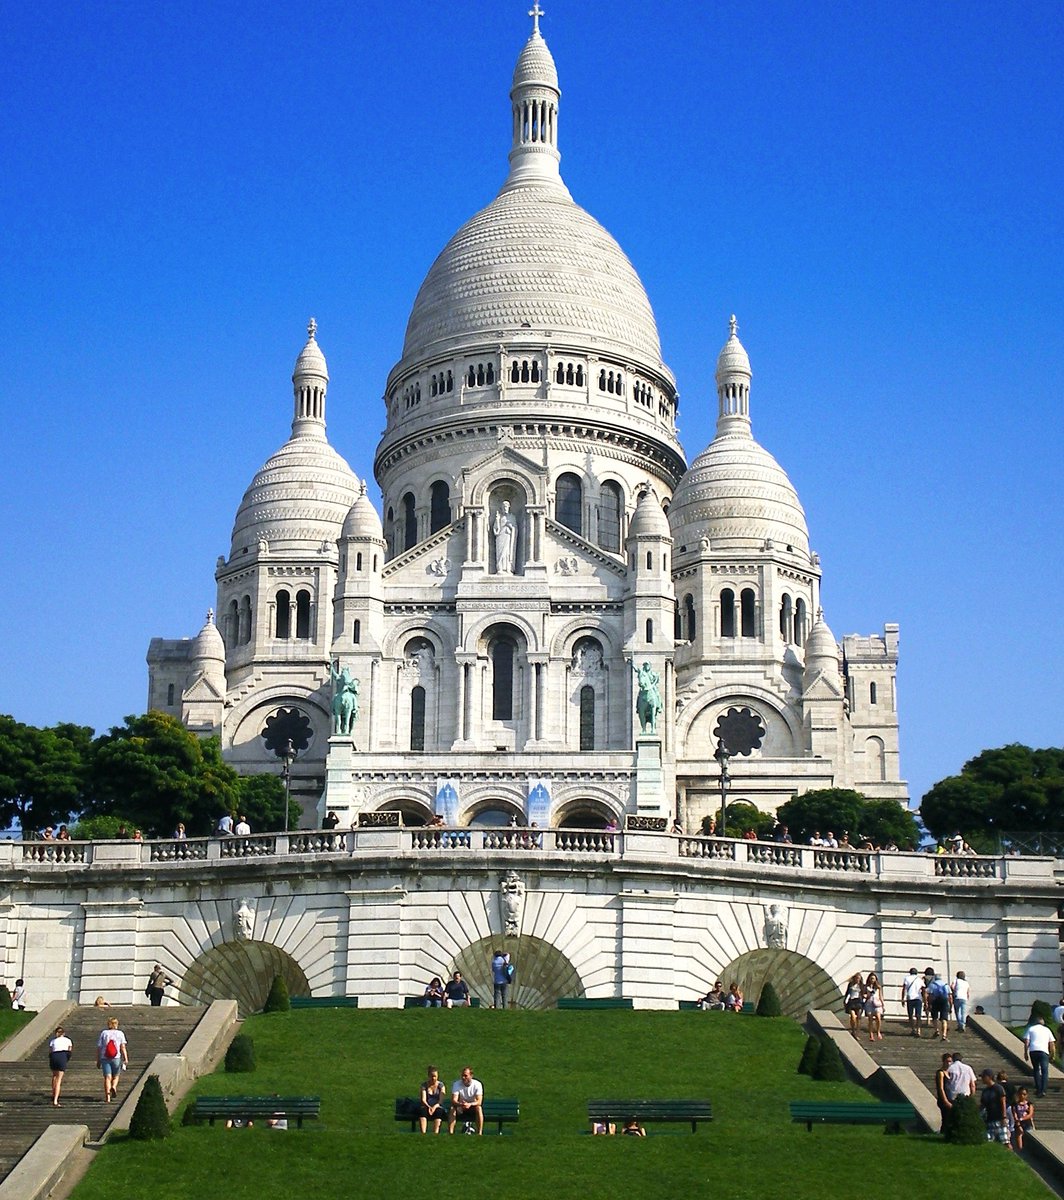 'The Basilica of Sacre-Coeur, perched on the hill of Montmartre in Paris, is a majestic example of Romanesque-Byzantine architecture. Construction of the basilica began in 1875 and took approximately 39 years to complete, with the consecration ceremony taking place in 1919.'